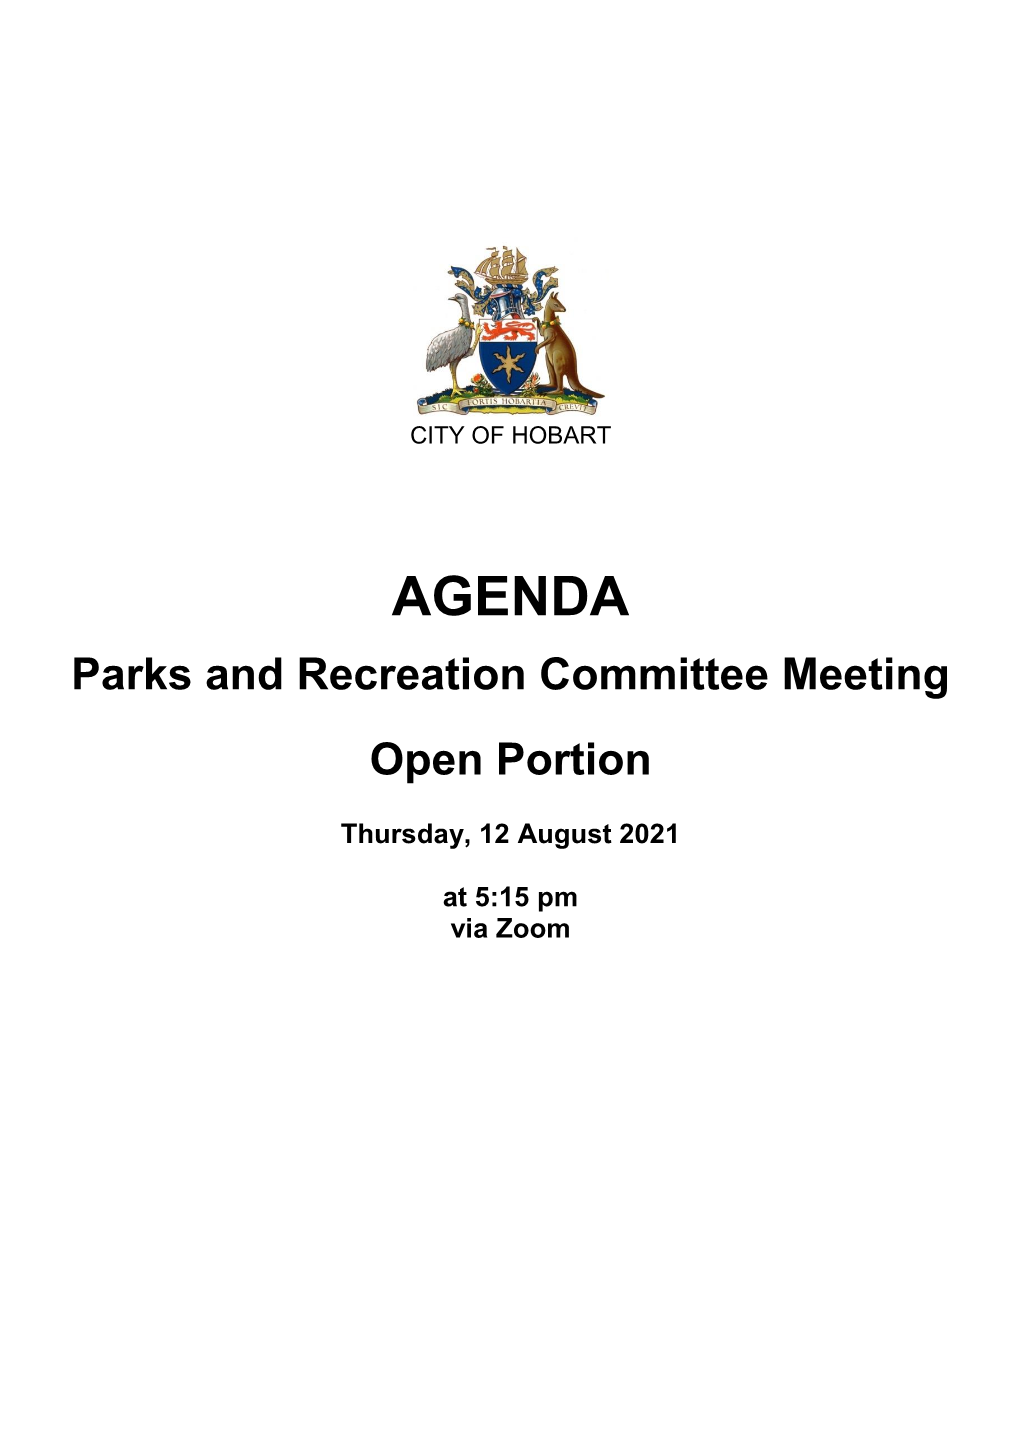 Parks and Recreation Committee Meeting Open Portion